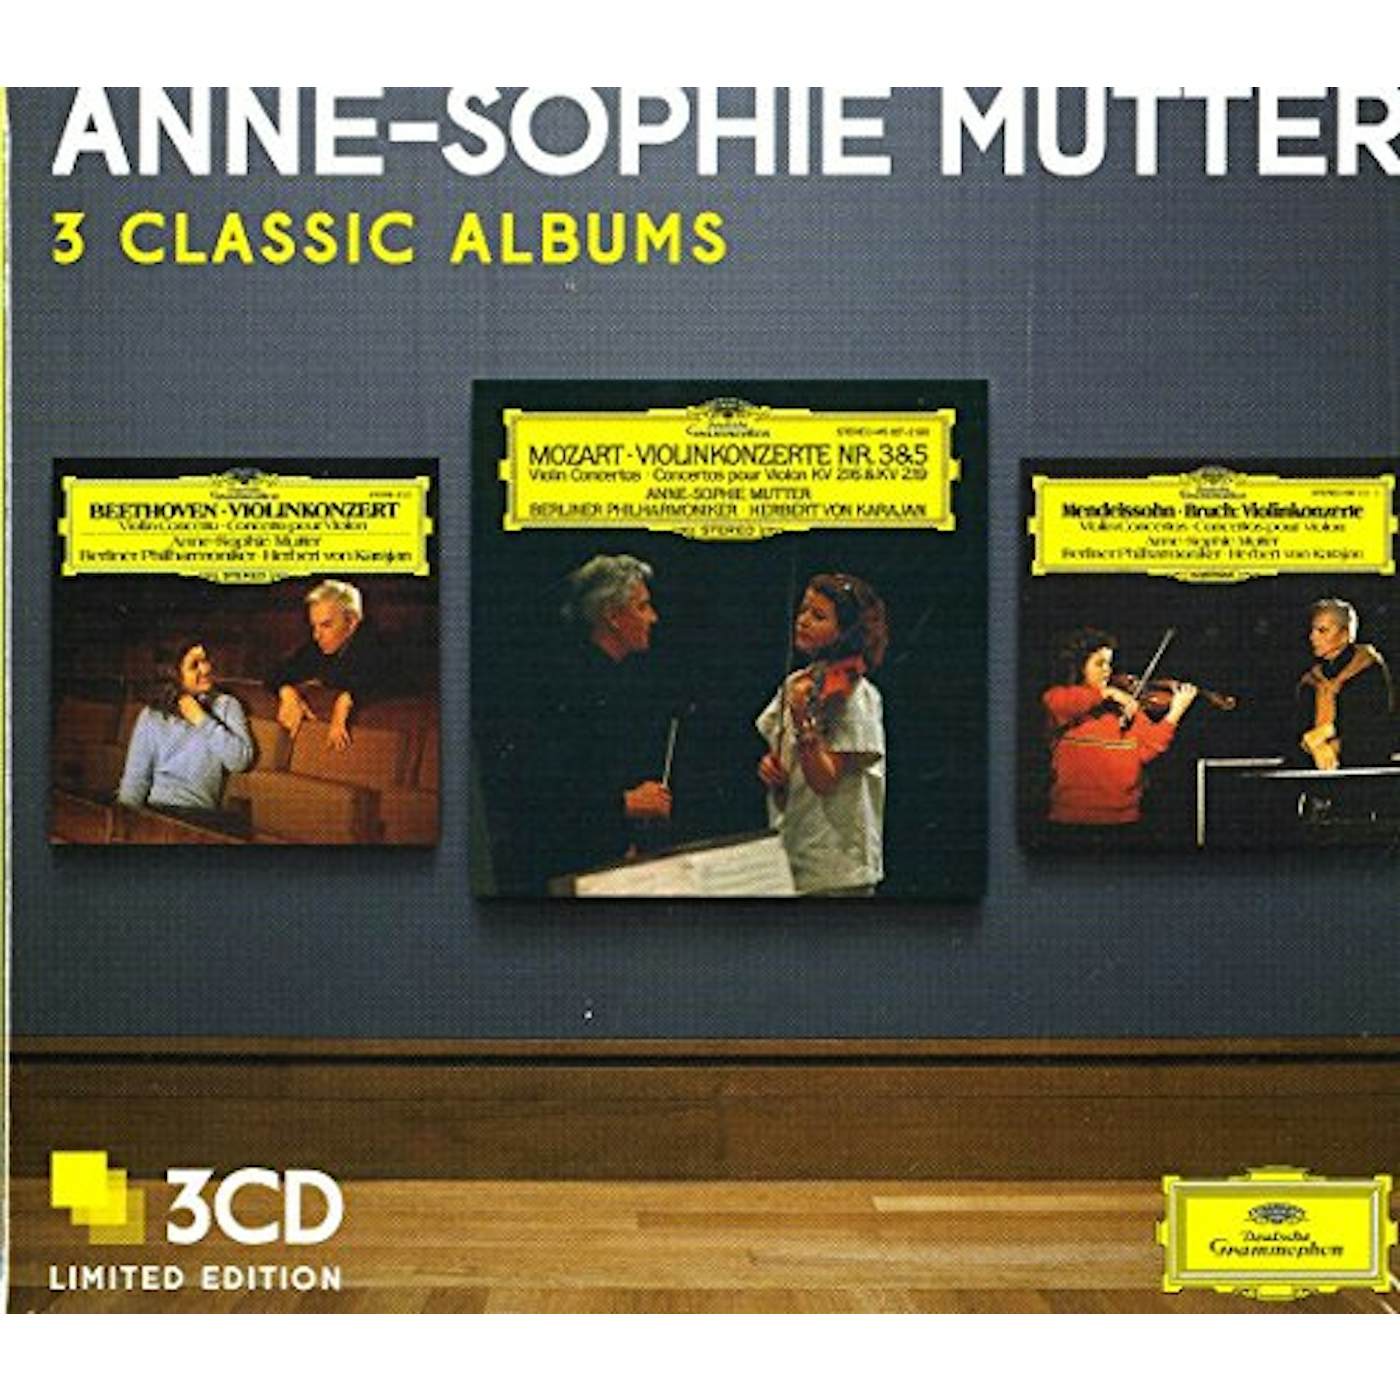 Anne-Sophie Mutter THREE CLASSIC ALBUMS CD